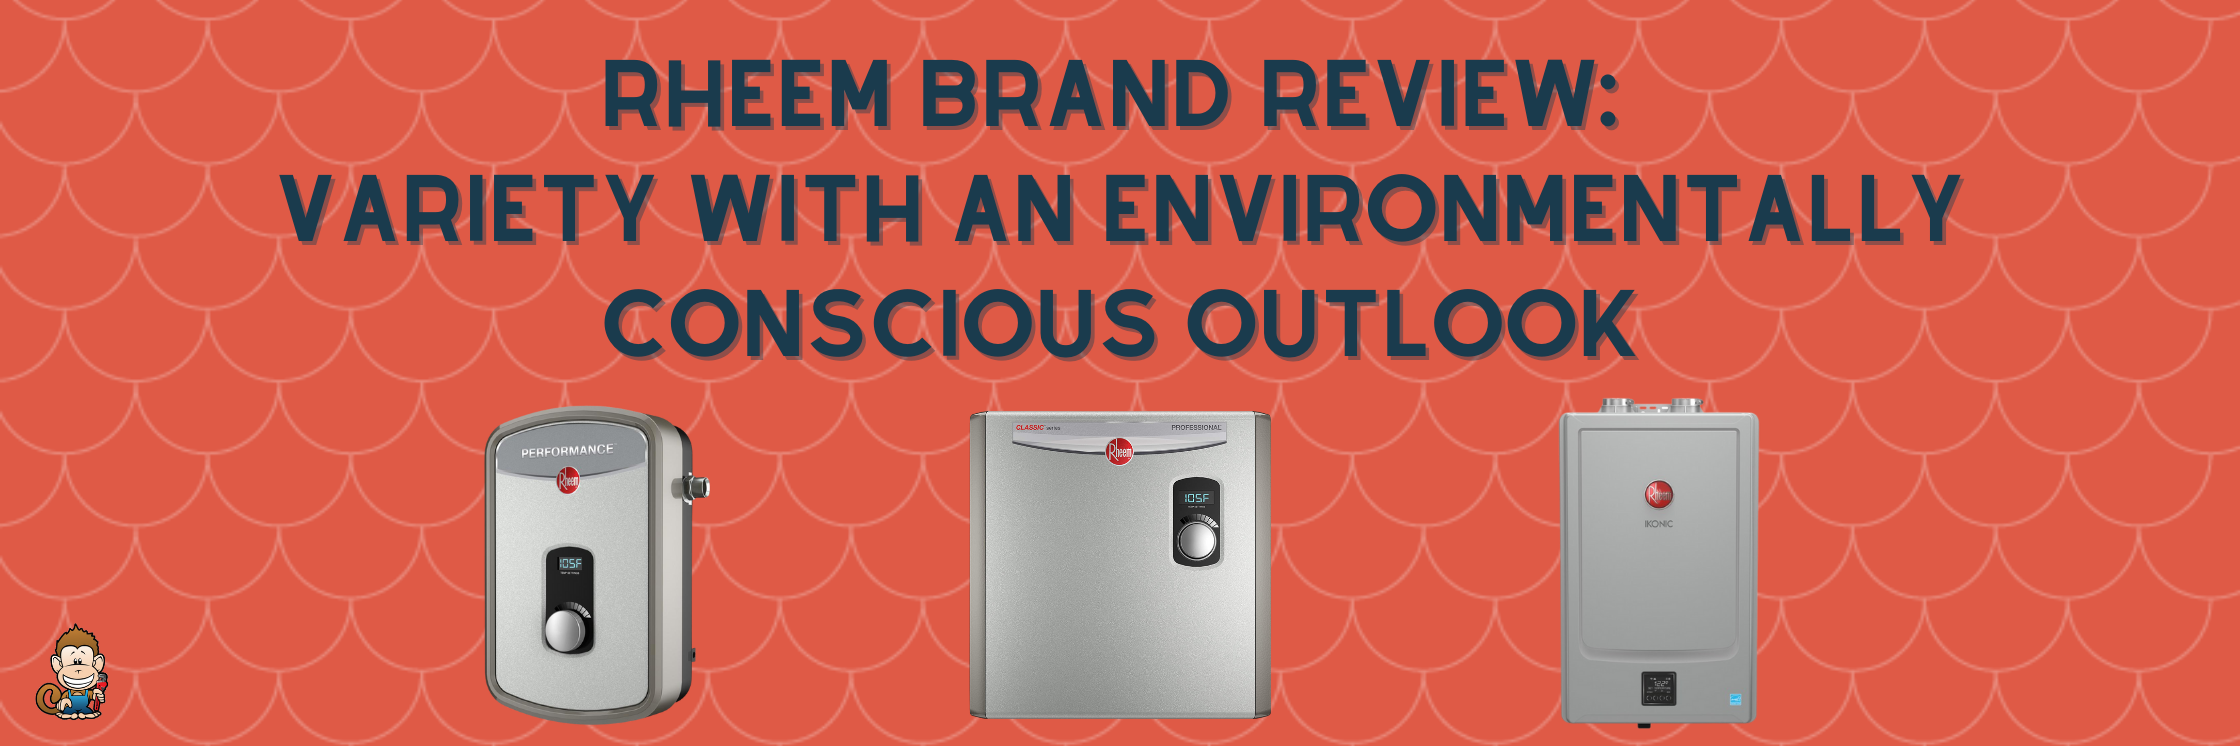 Rheem Brand Review: Variety with an Environmentally Conscious Outlook